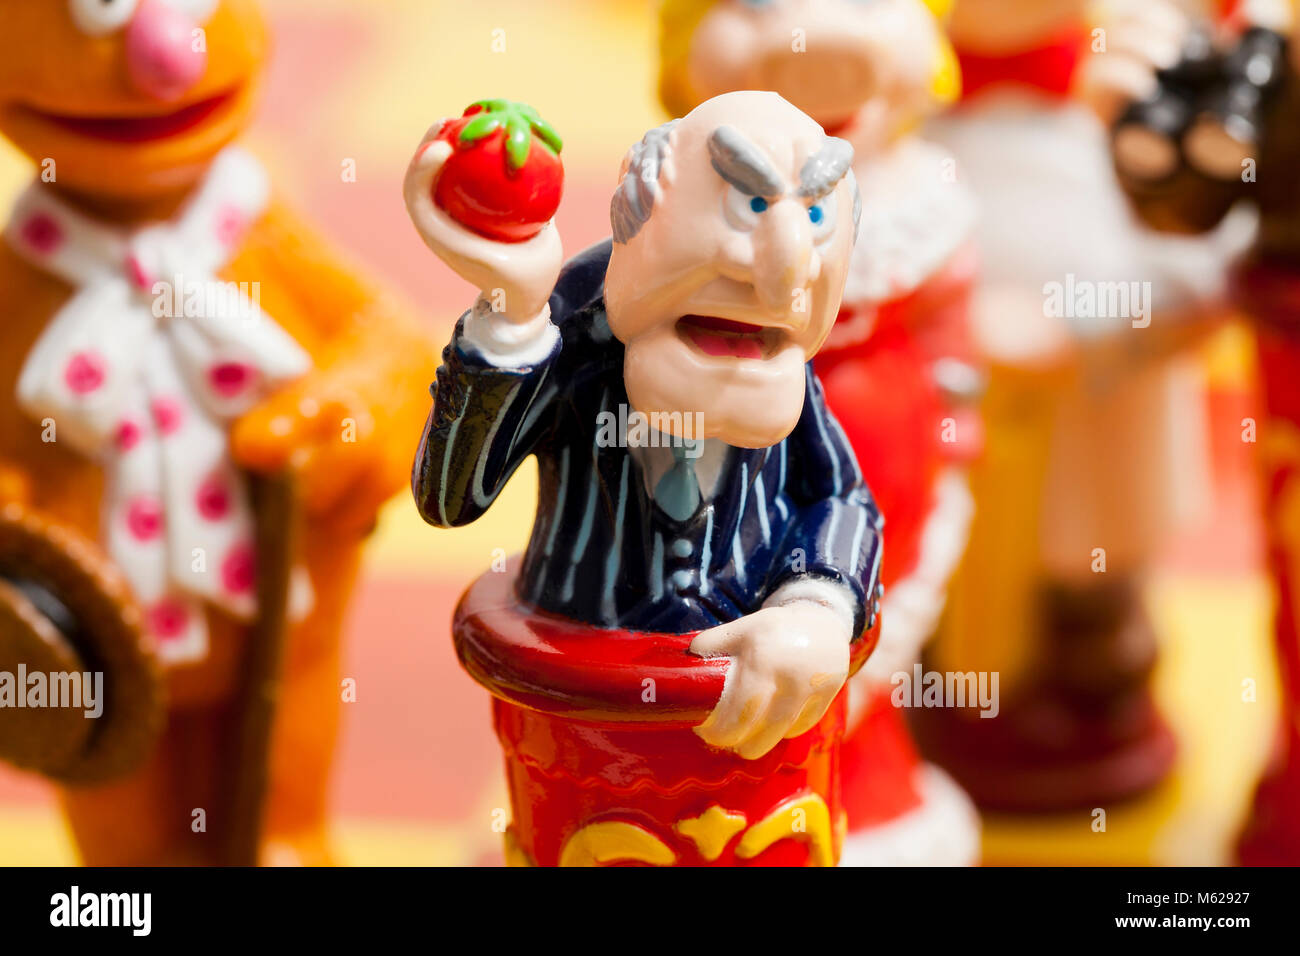 The Muppets action figure toy of Statler (Statler and Waldorf, heckling grouchy old men) - USA Stock Photo